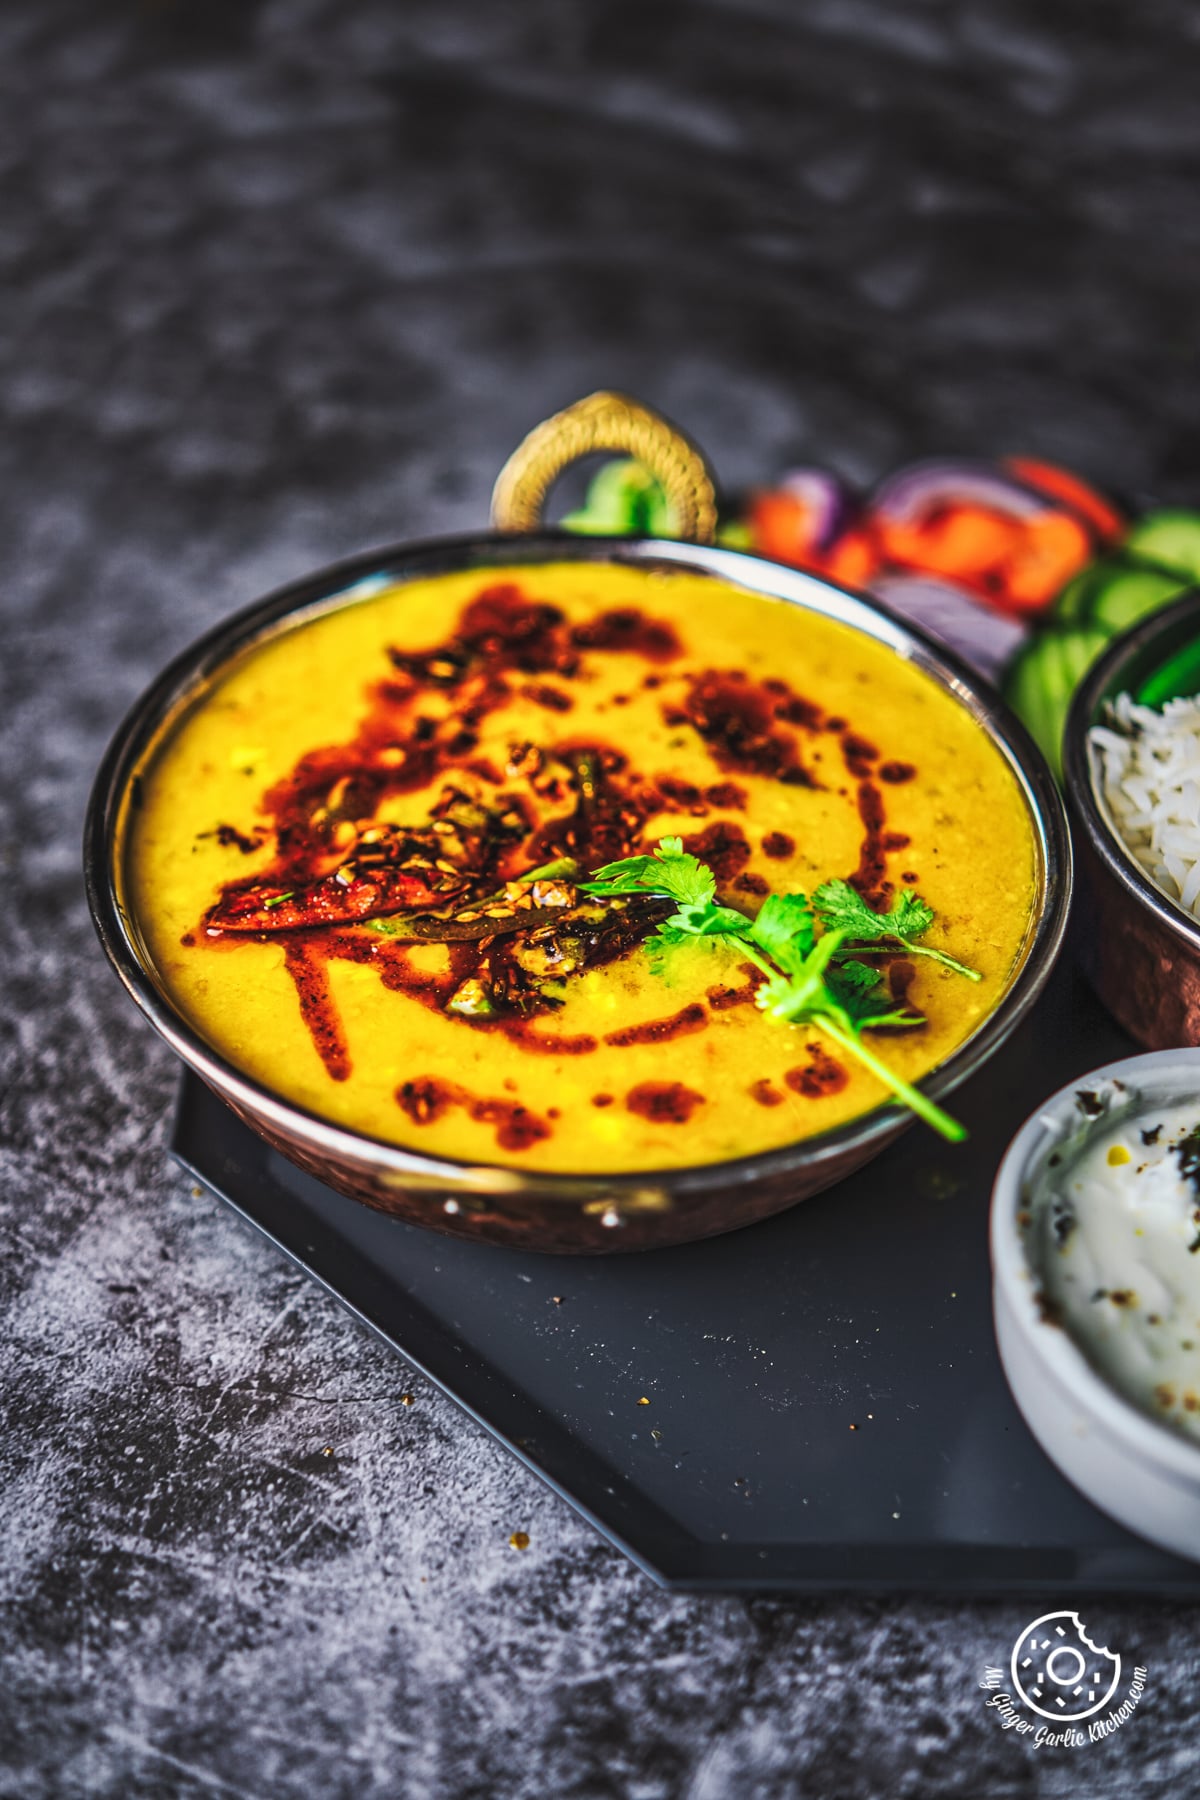 Instant Pot & Stovetop: Yellow Split Moong Dal with Our Punjabi Masala